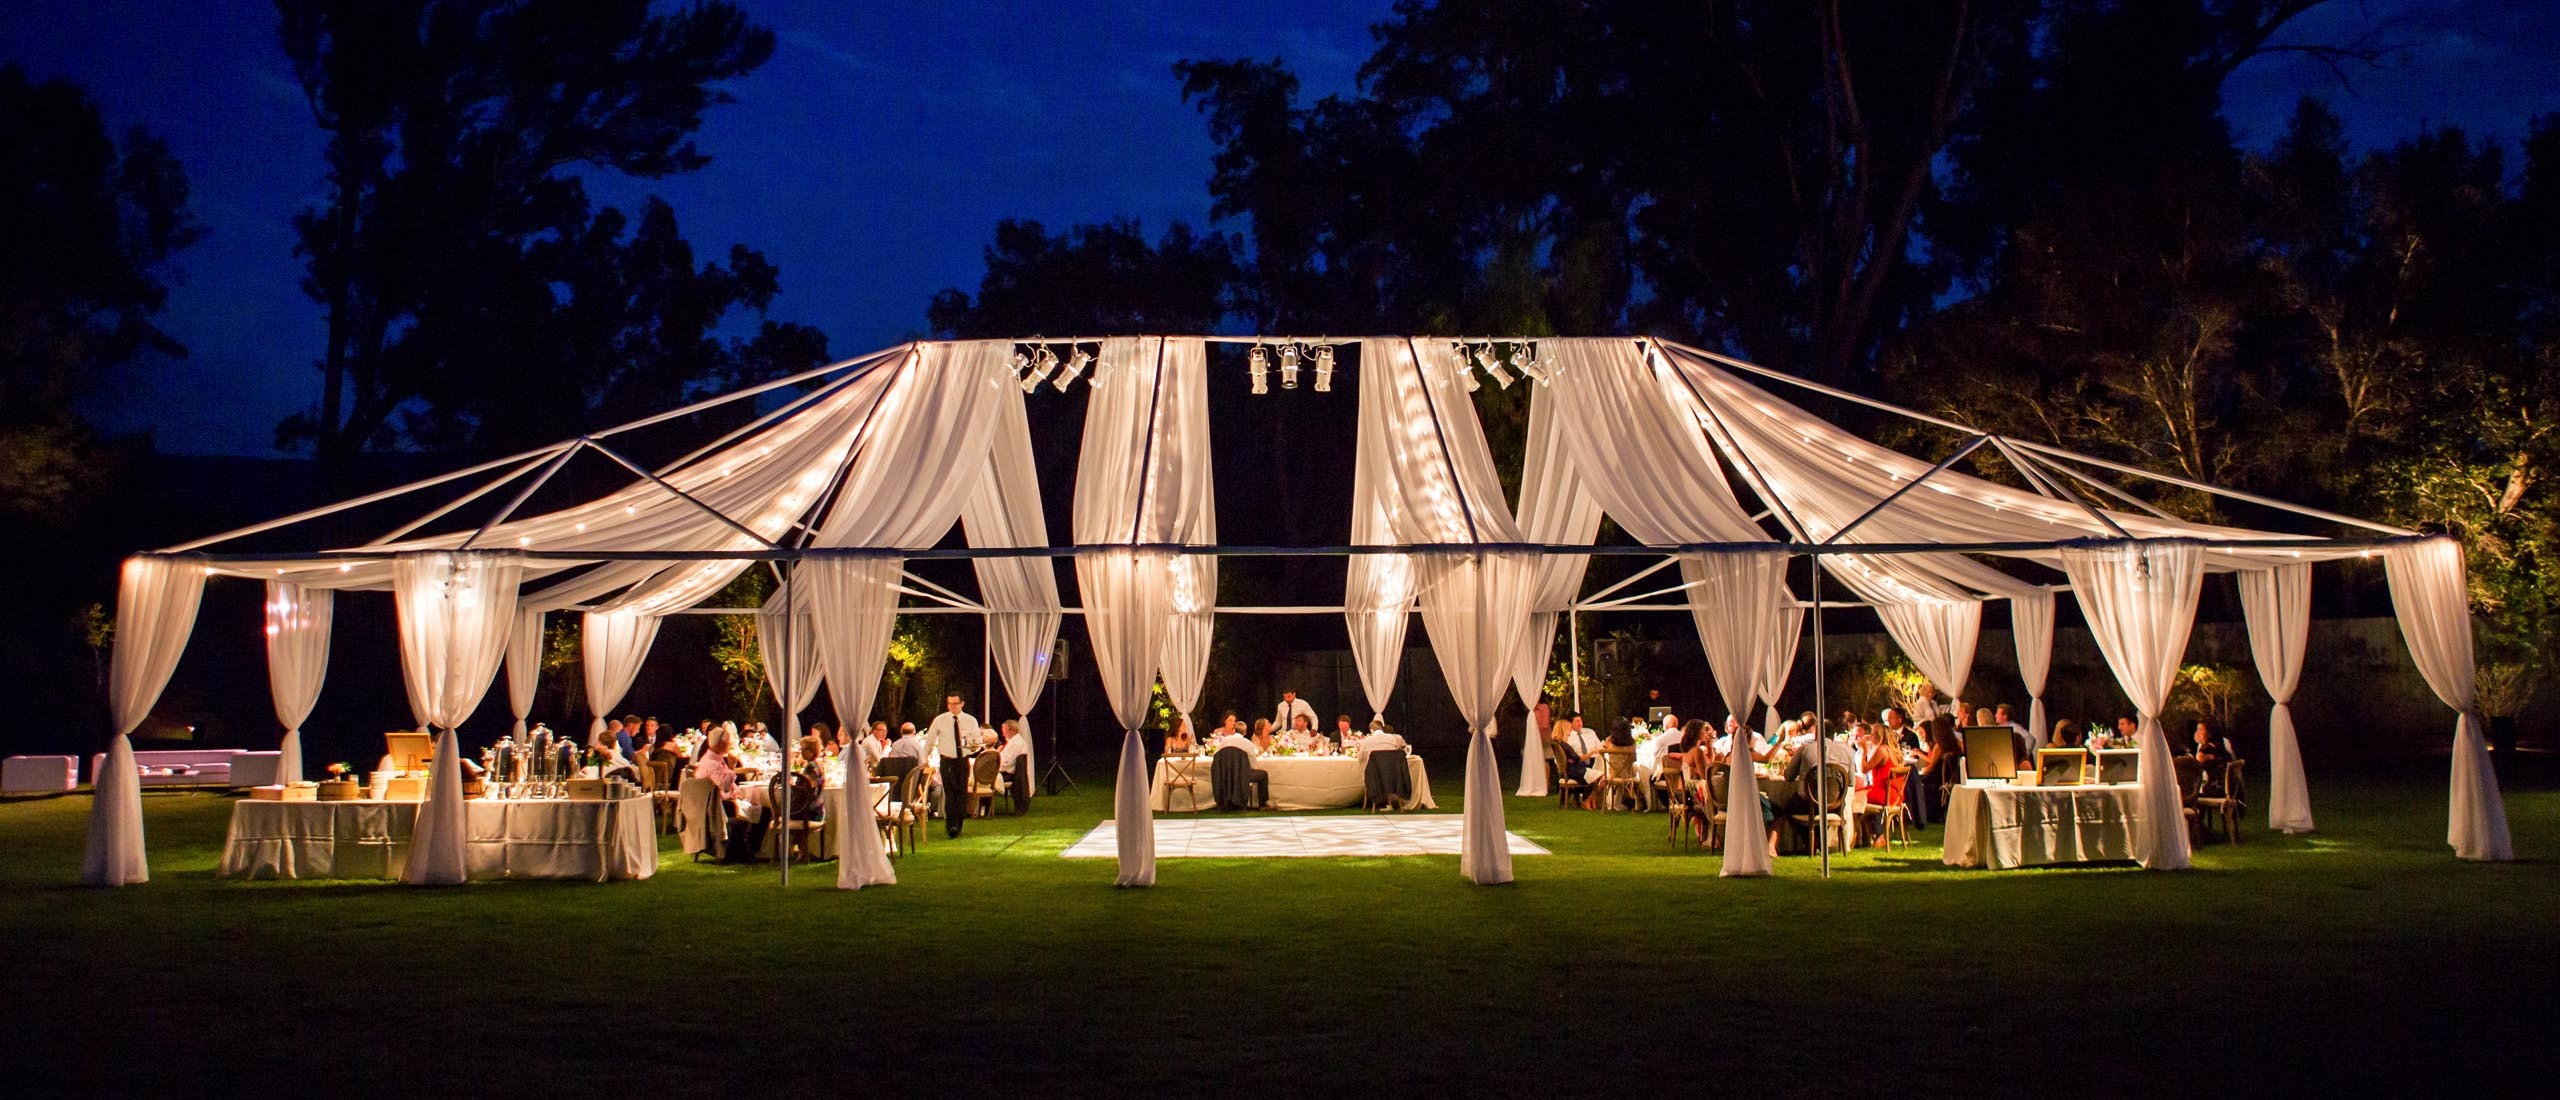 22 Ideas for Ojai Wedding Venues - Home, Family, Style and Art Ideas